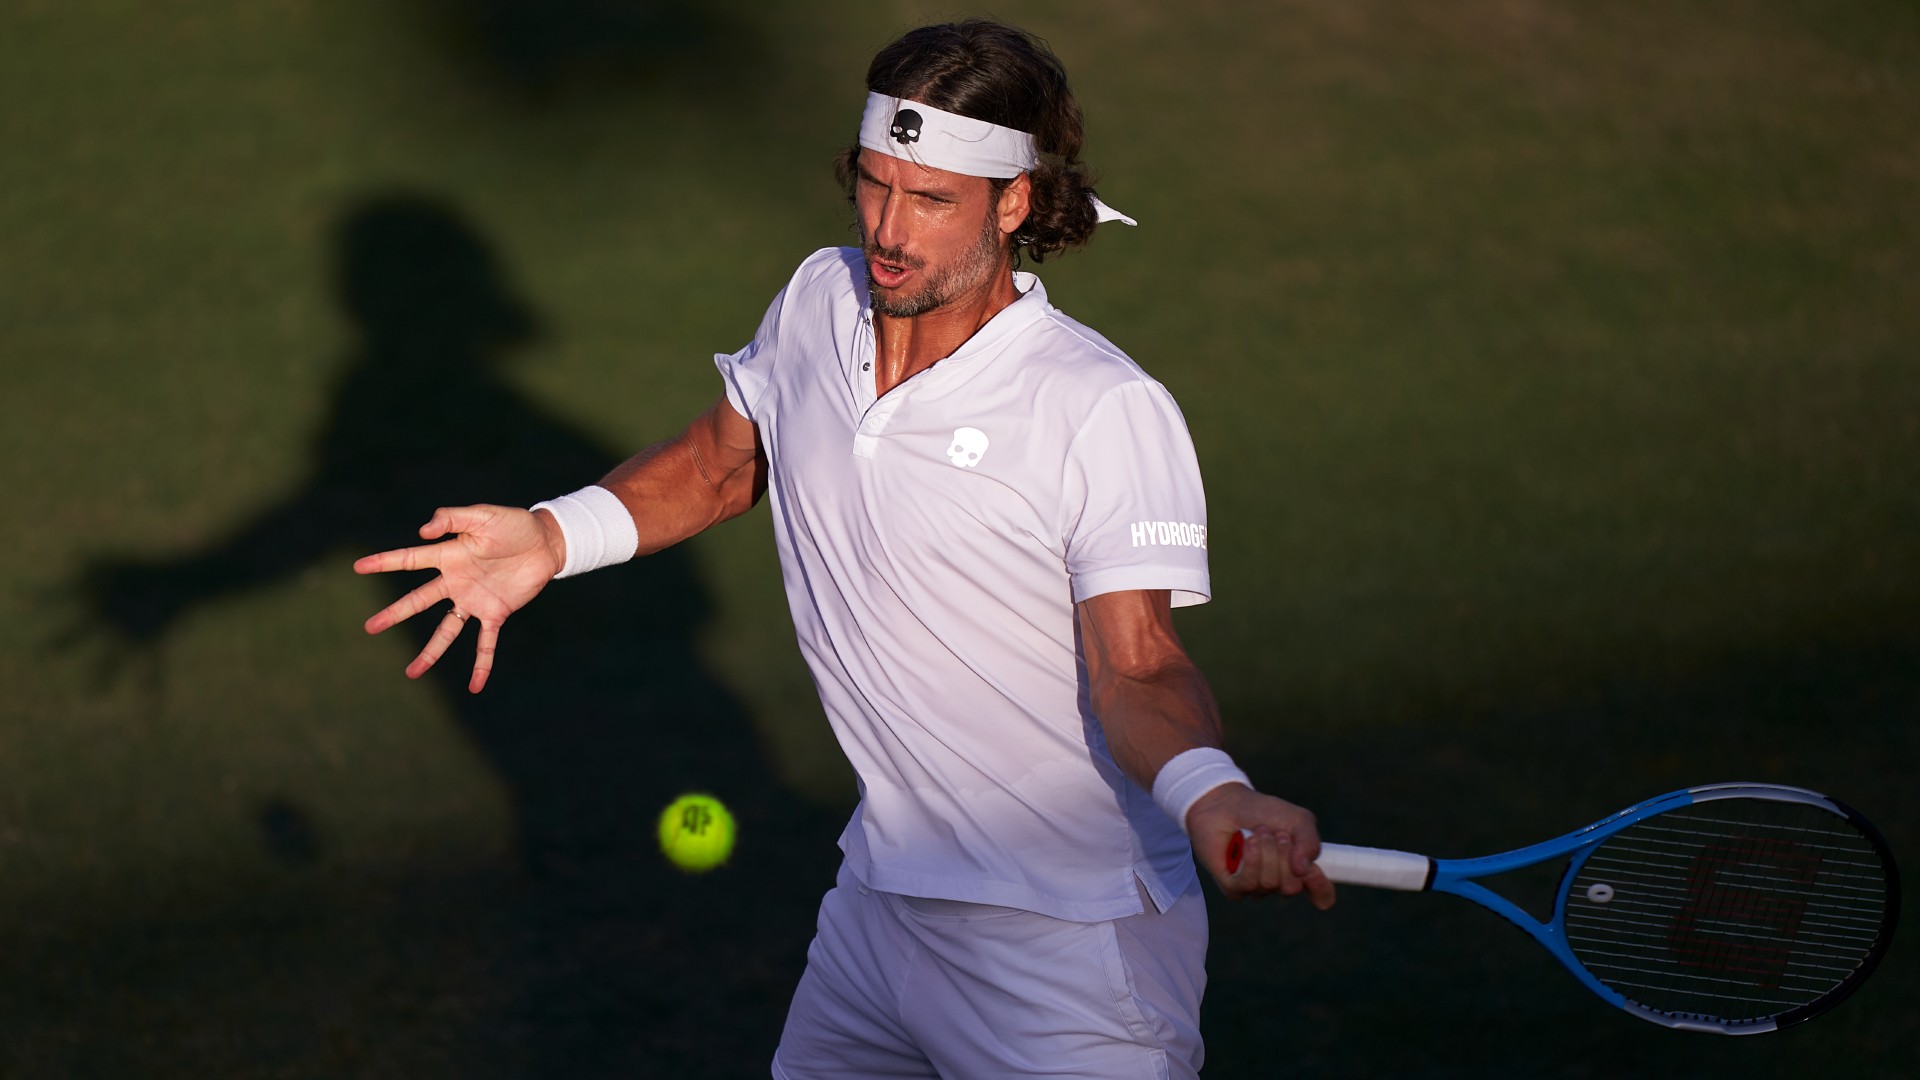 Veteran Feliciano Lopez reached a career landmark in Mallorca but there was a pre-Wimbledon injury scare for Dominic Thiem.